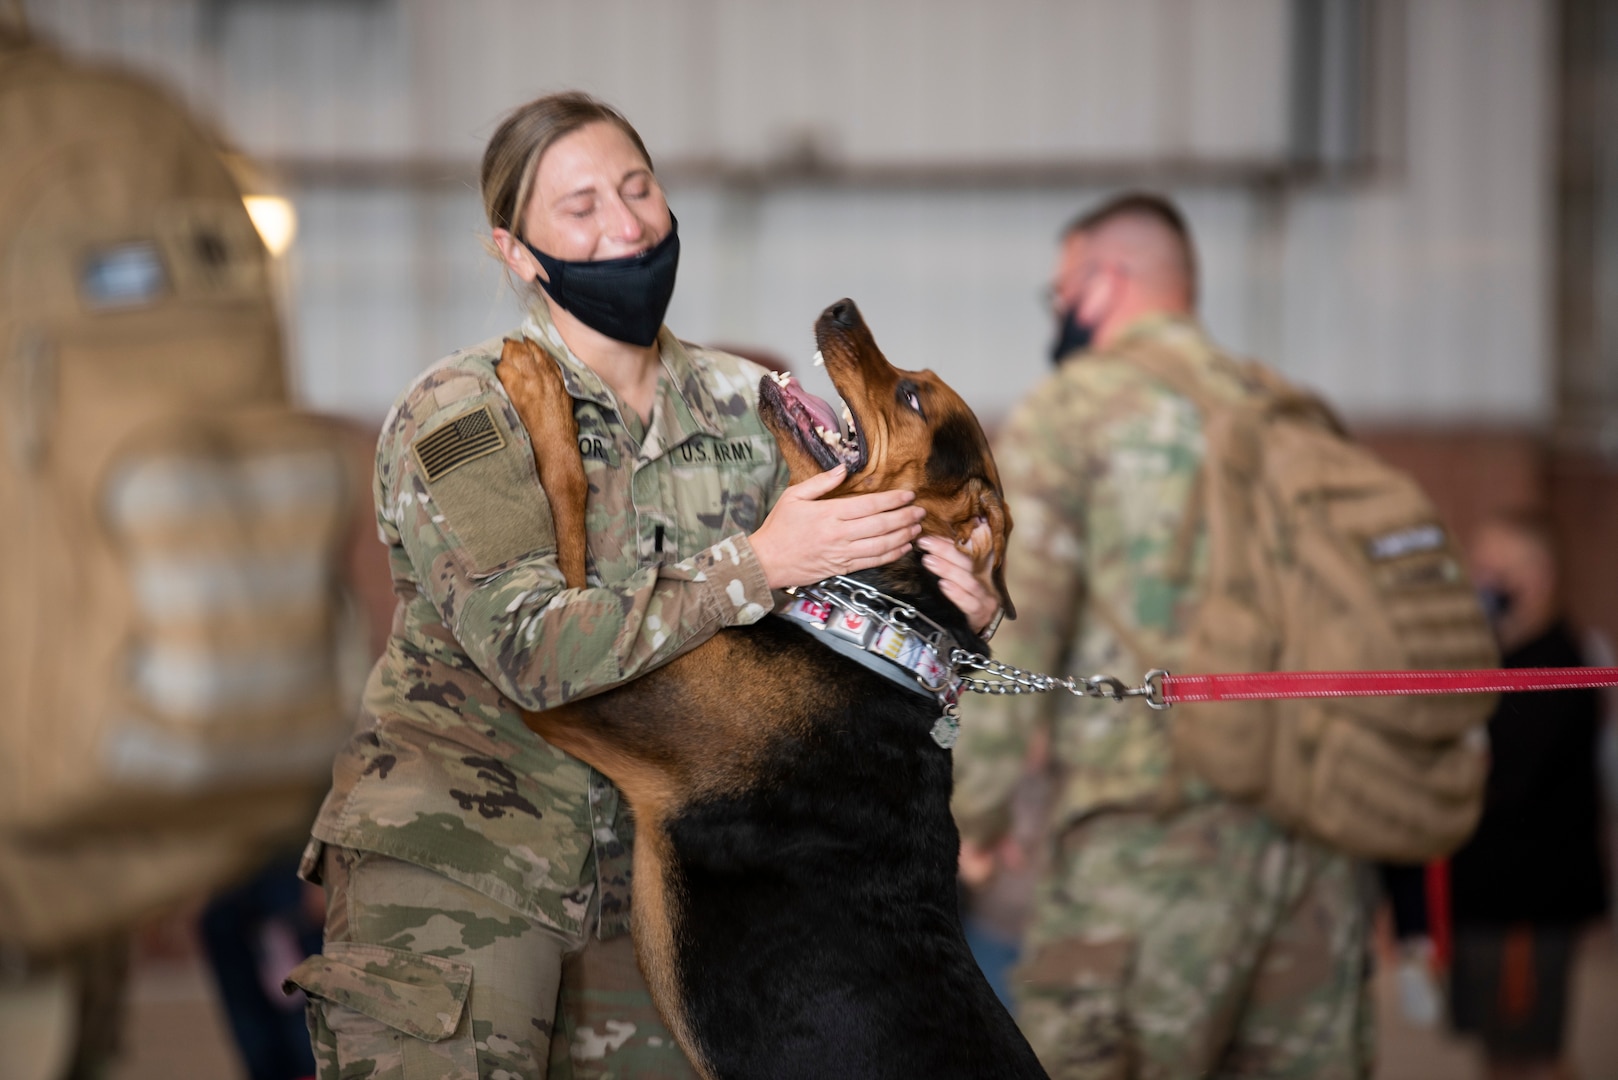 More than 160 members of the 157th Military Police Company, 771st Troop Command Battalion, returned to Martinsburg, West Virginia, Oct. 24, 2020, from a nine-month deployment to Guantanamo Bay, Cuba. While deployed, they provided support for Joint Task Force – Guantanamo in its safe, legal and humane detention mission. (U.S. Air National Guard photo by Staff Sgt. Timothy Sencindiver)